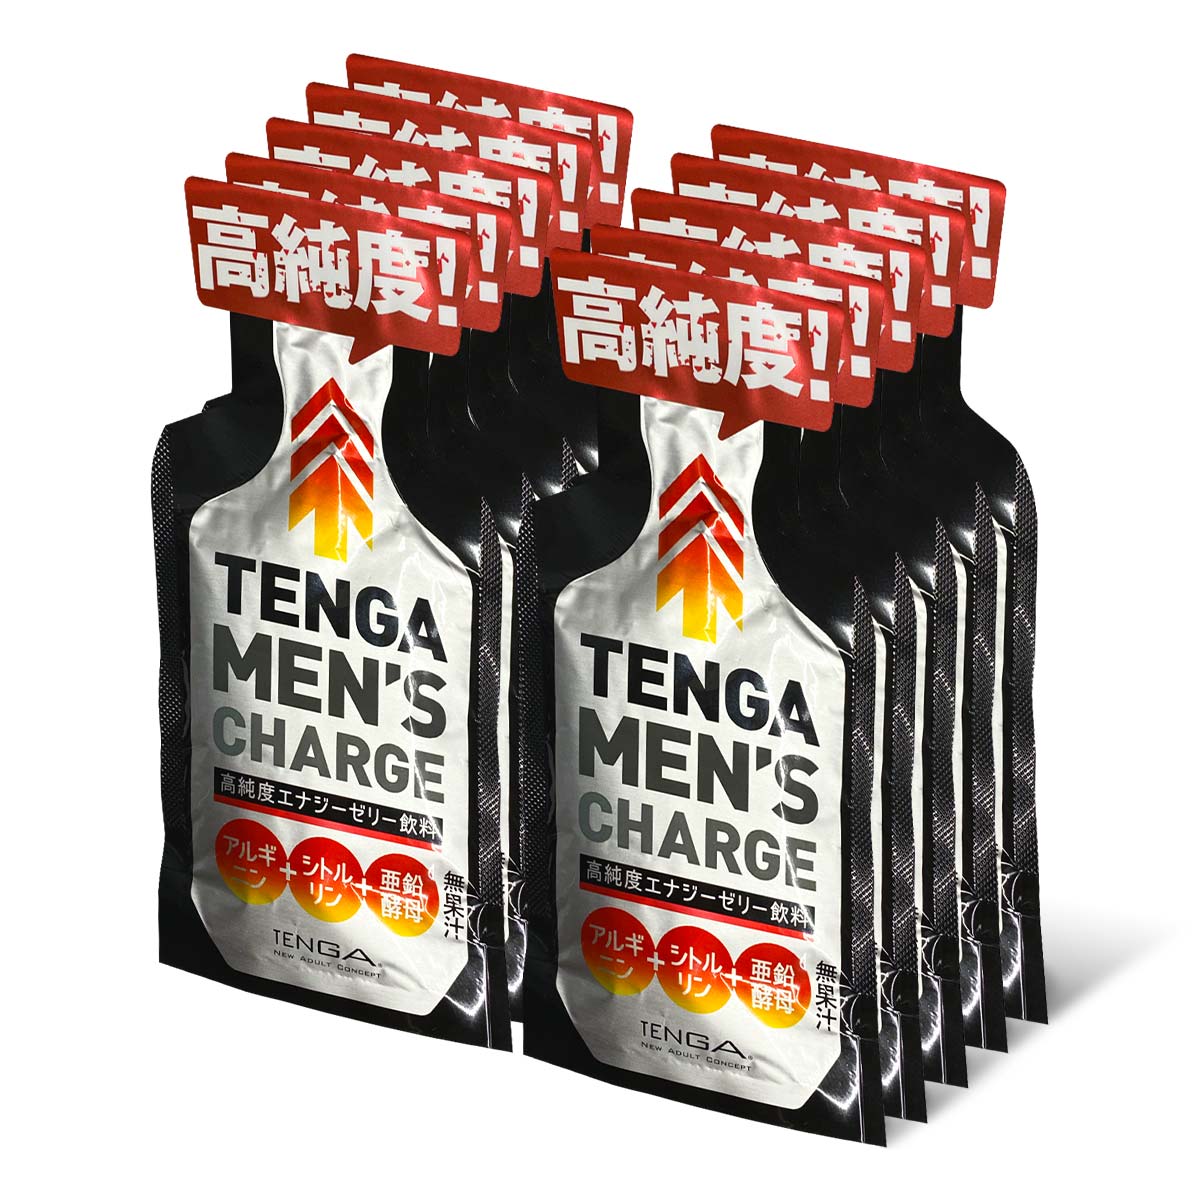 TENGA MEN'S CHARGE Concentrated Energy Jelly Drinks 10pcs Combo-p_1